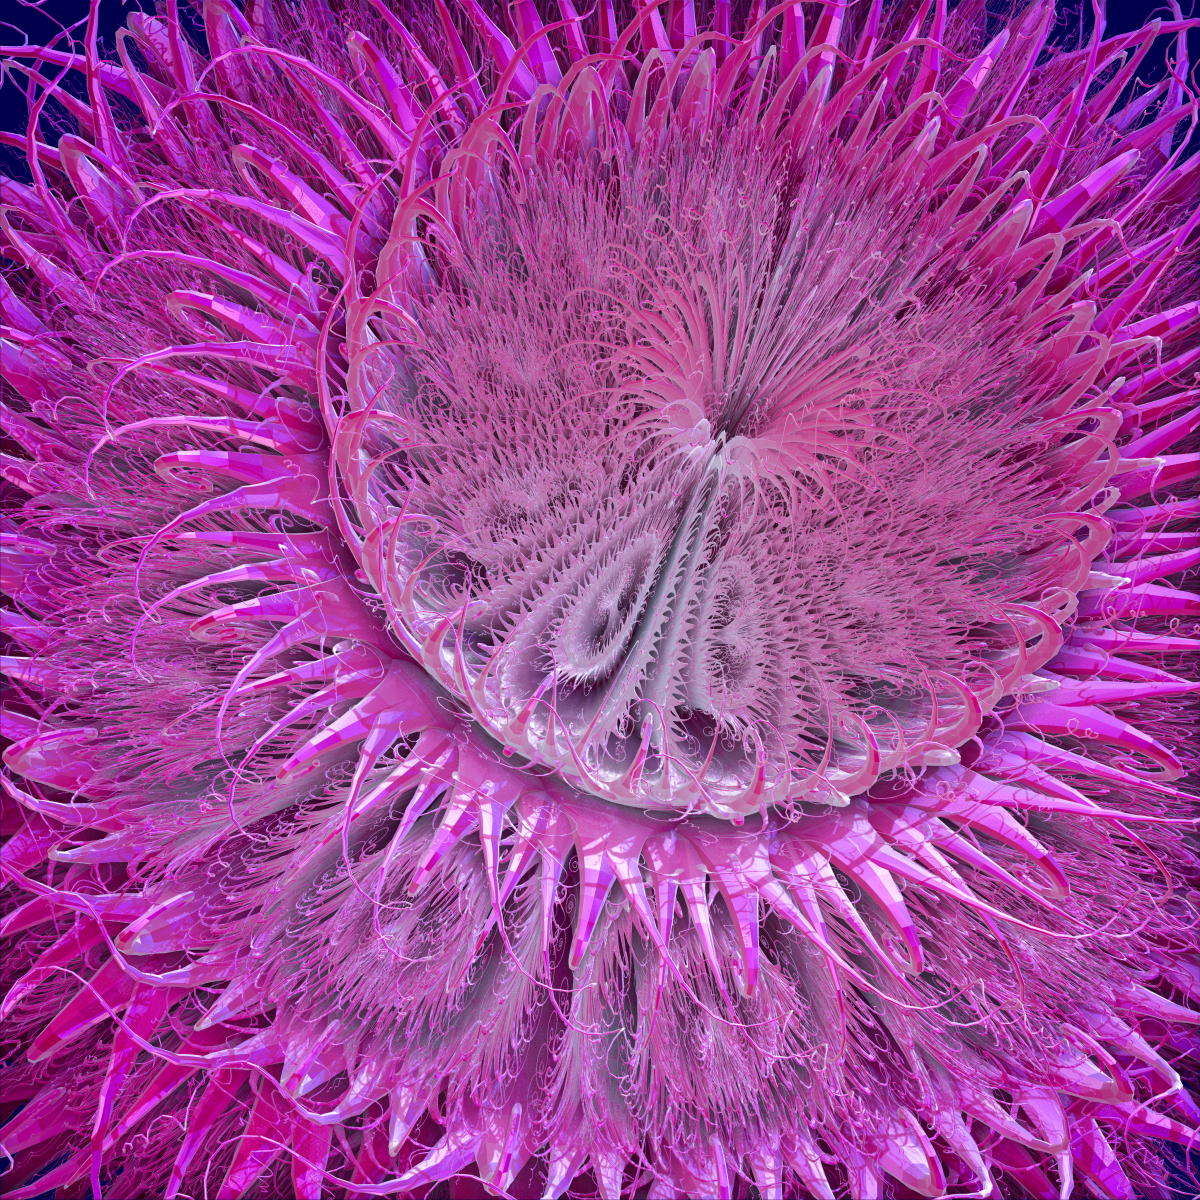 Sea Anemone by Aexion on DeviantArt